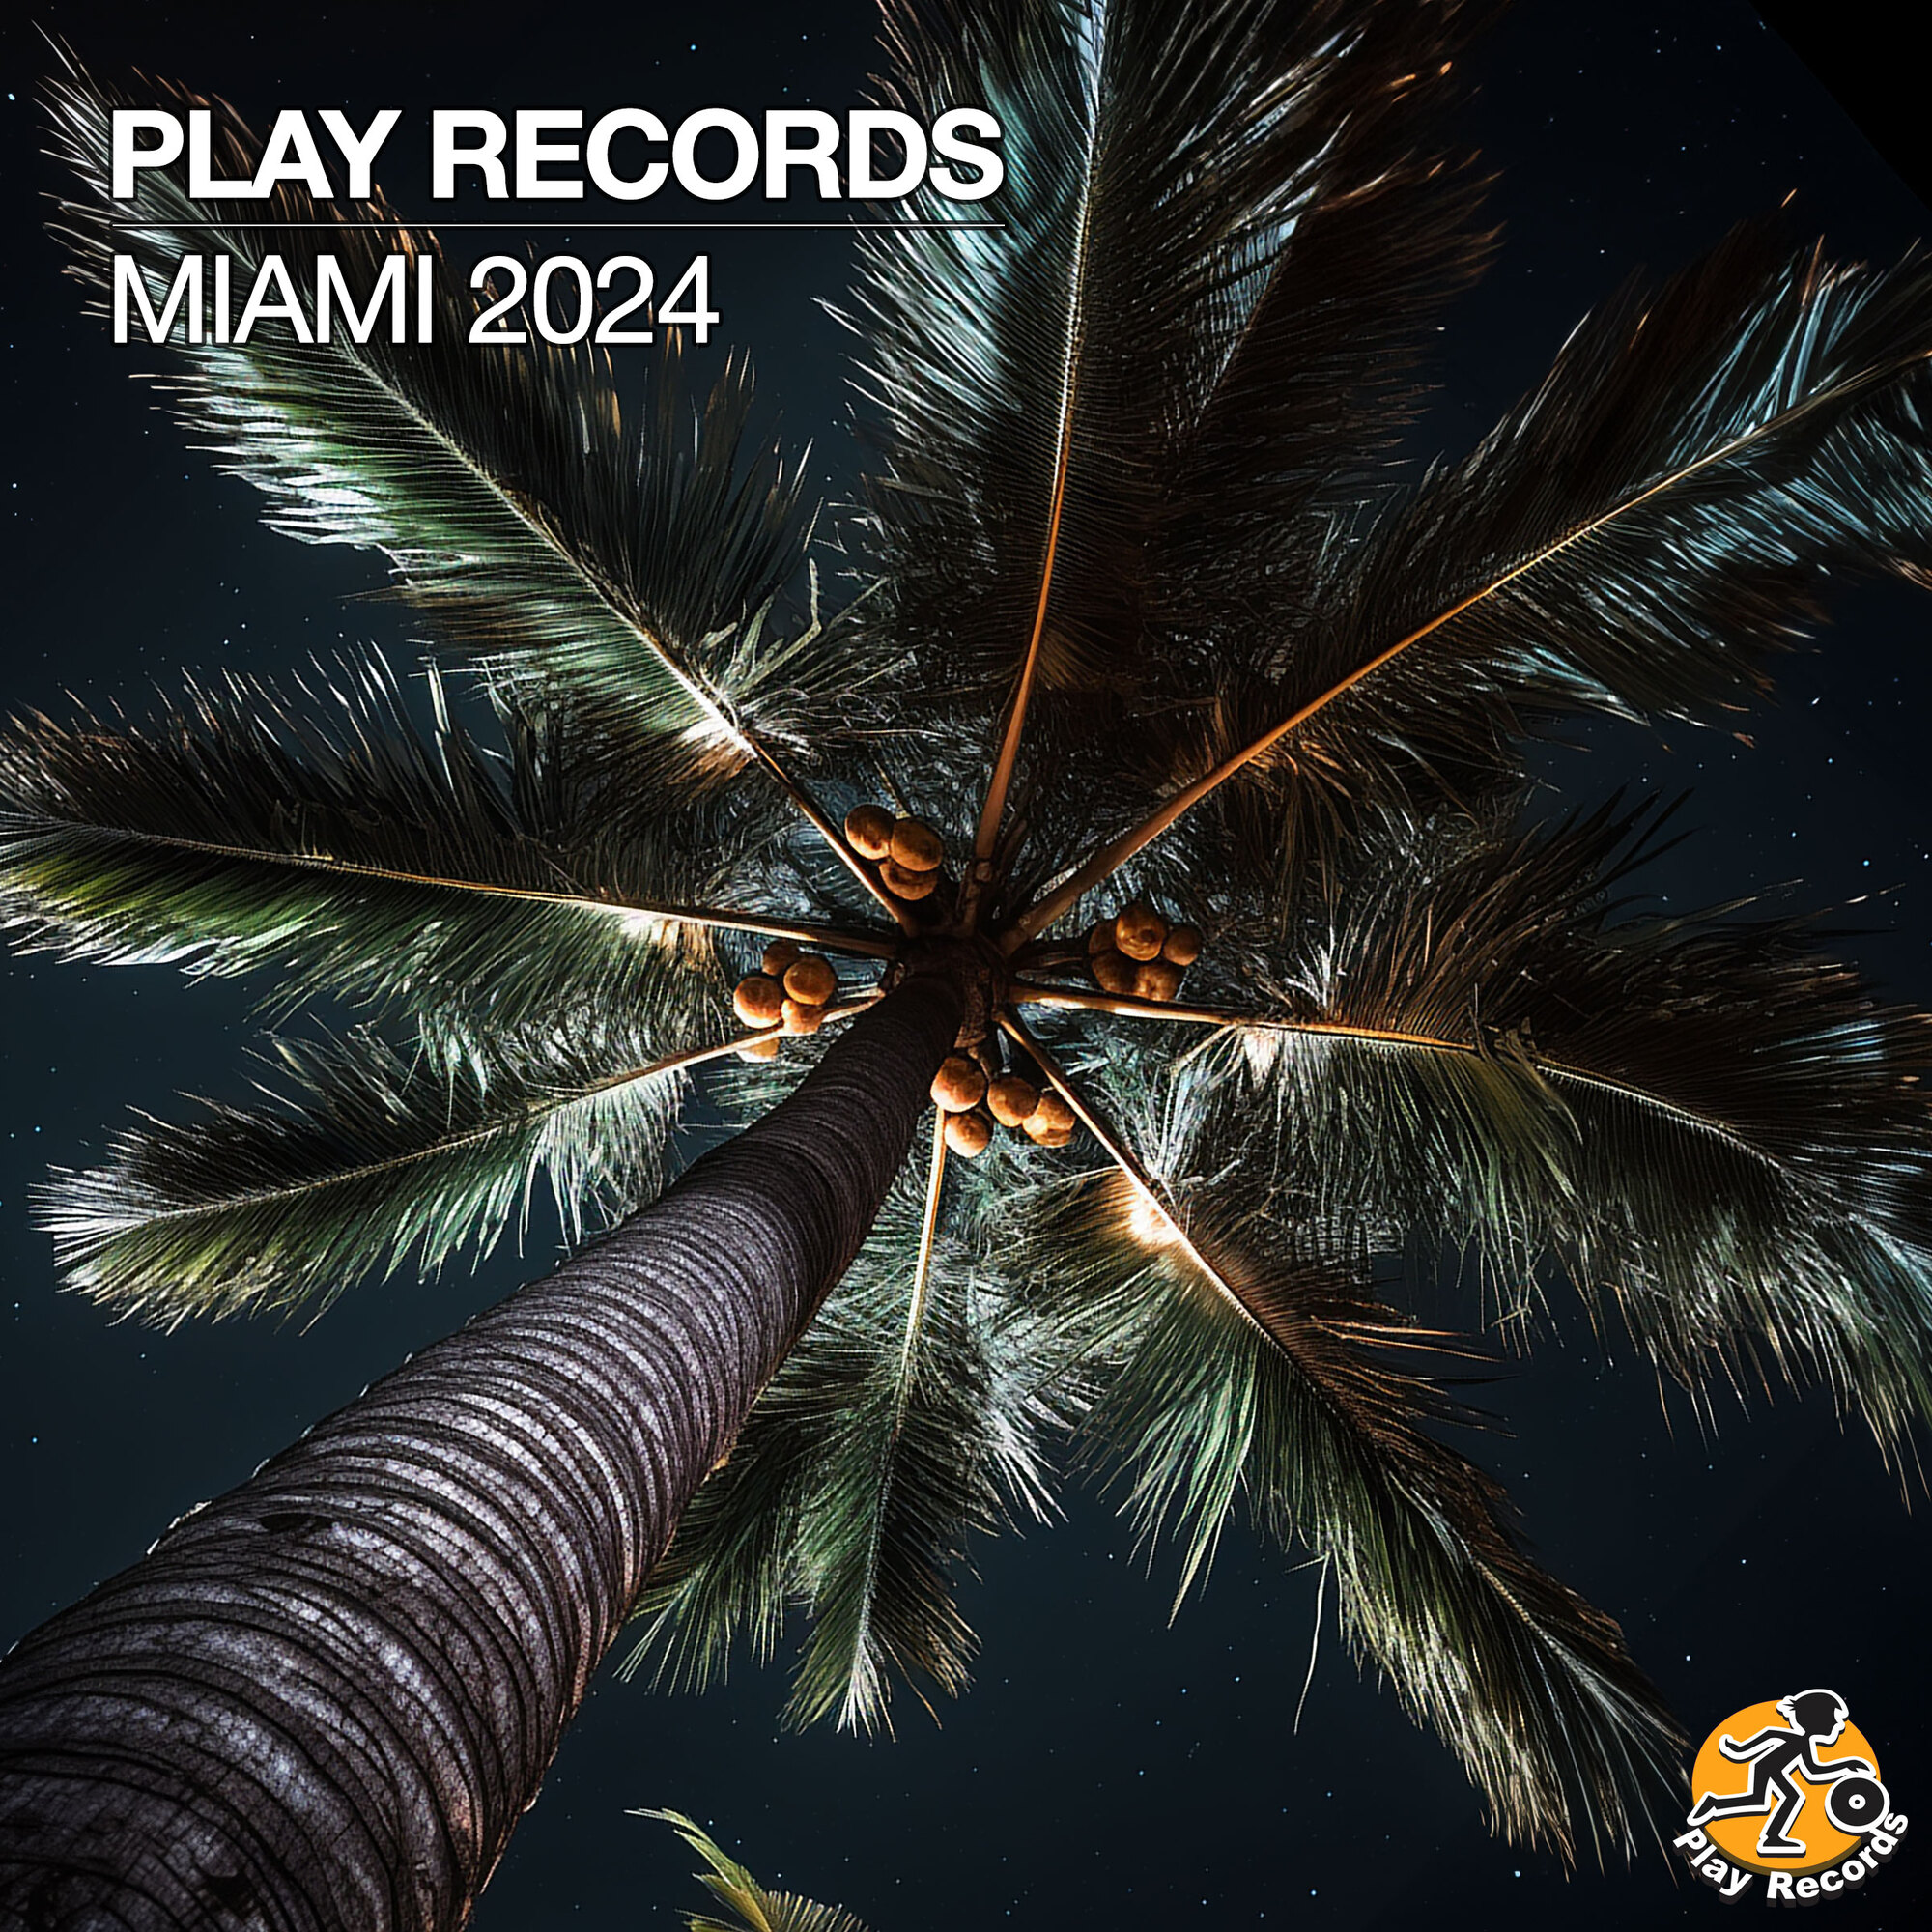 Presenting Play Records' New Captivating Release 'Miami 2024'